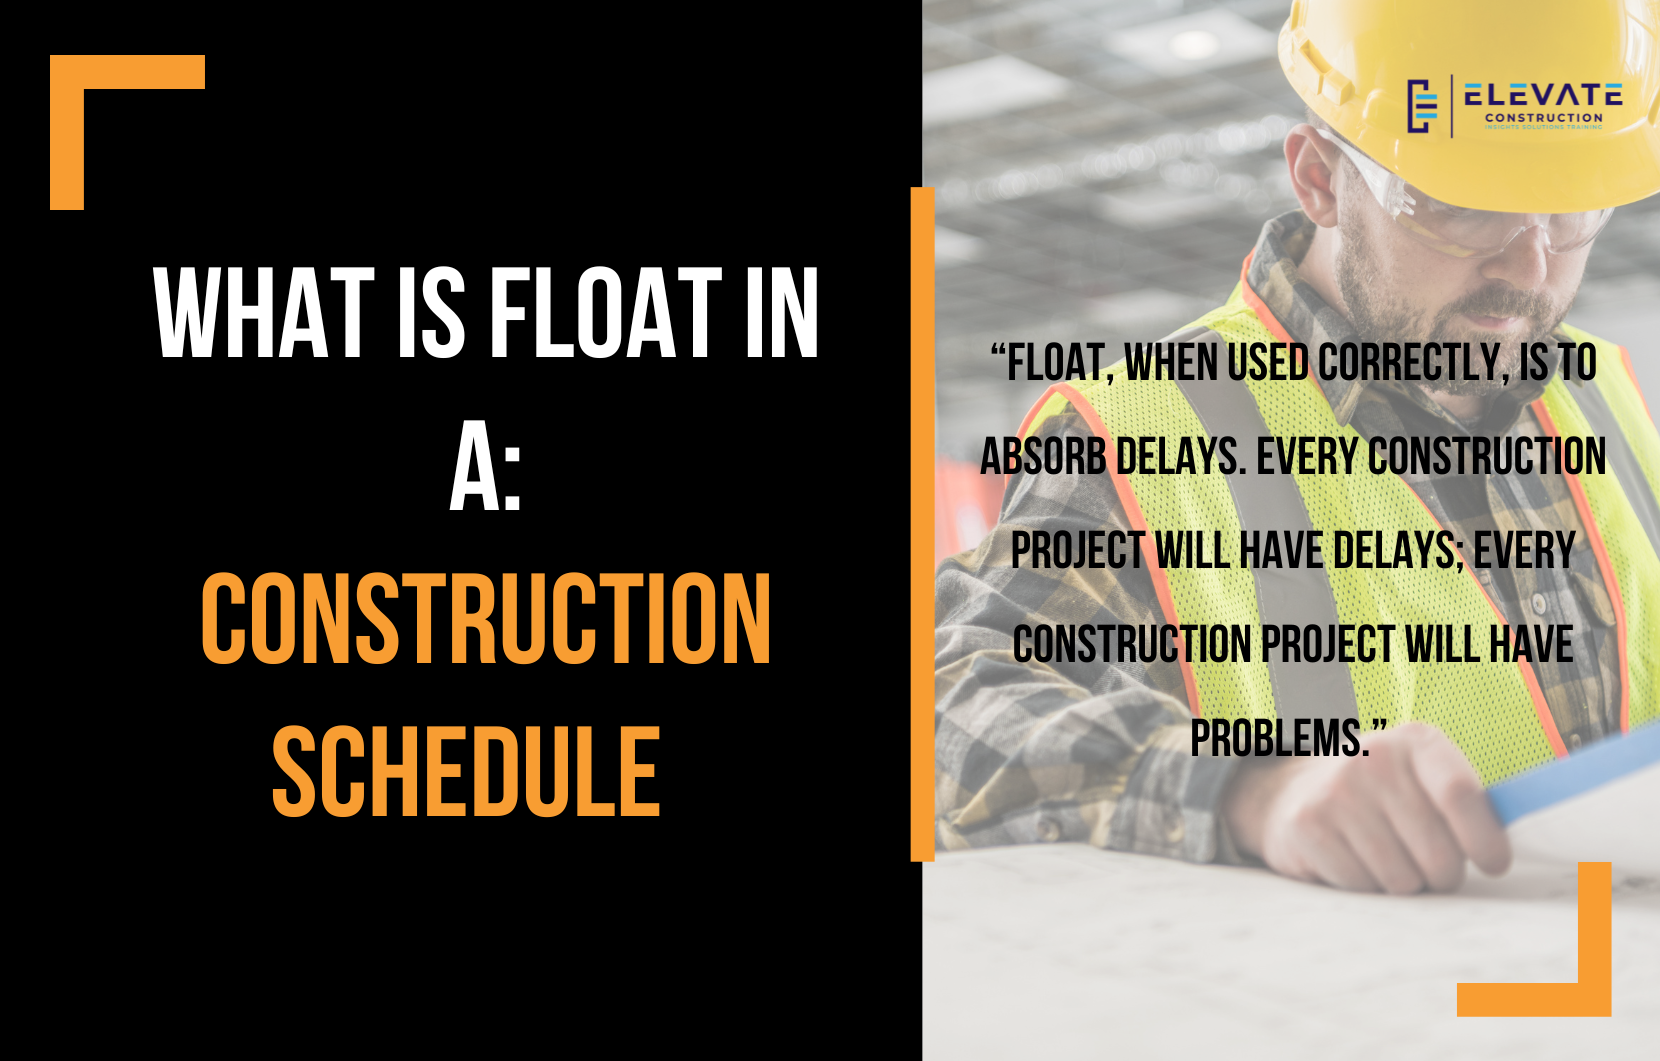 What Is Float In A Construction Schedule?